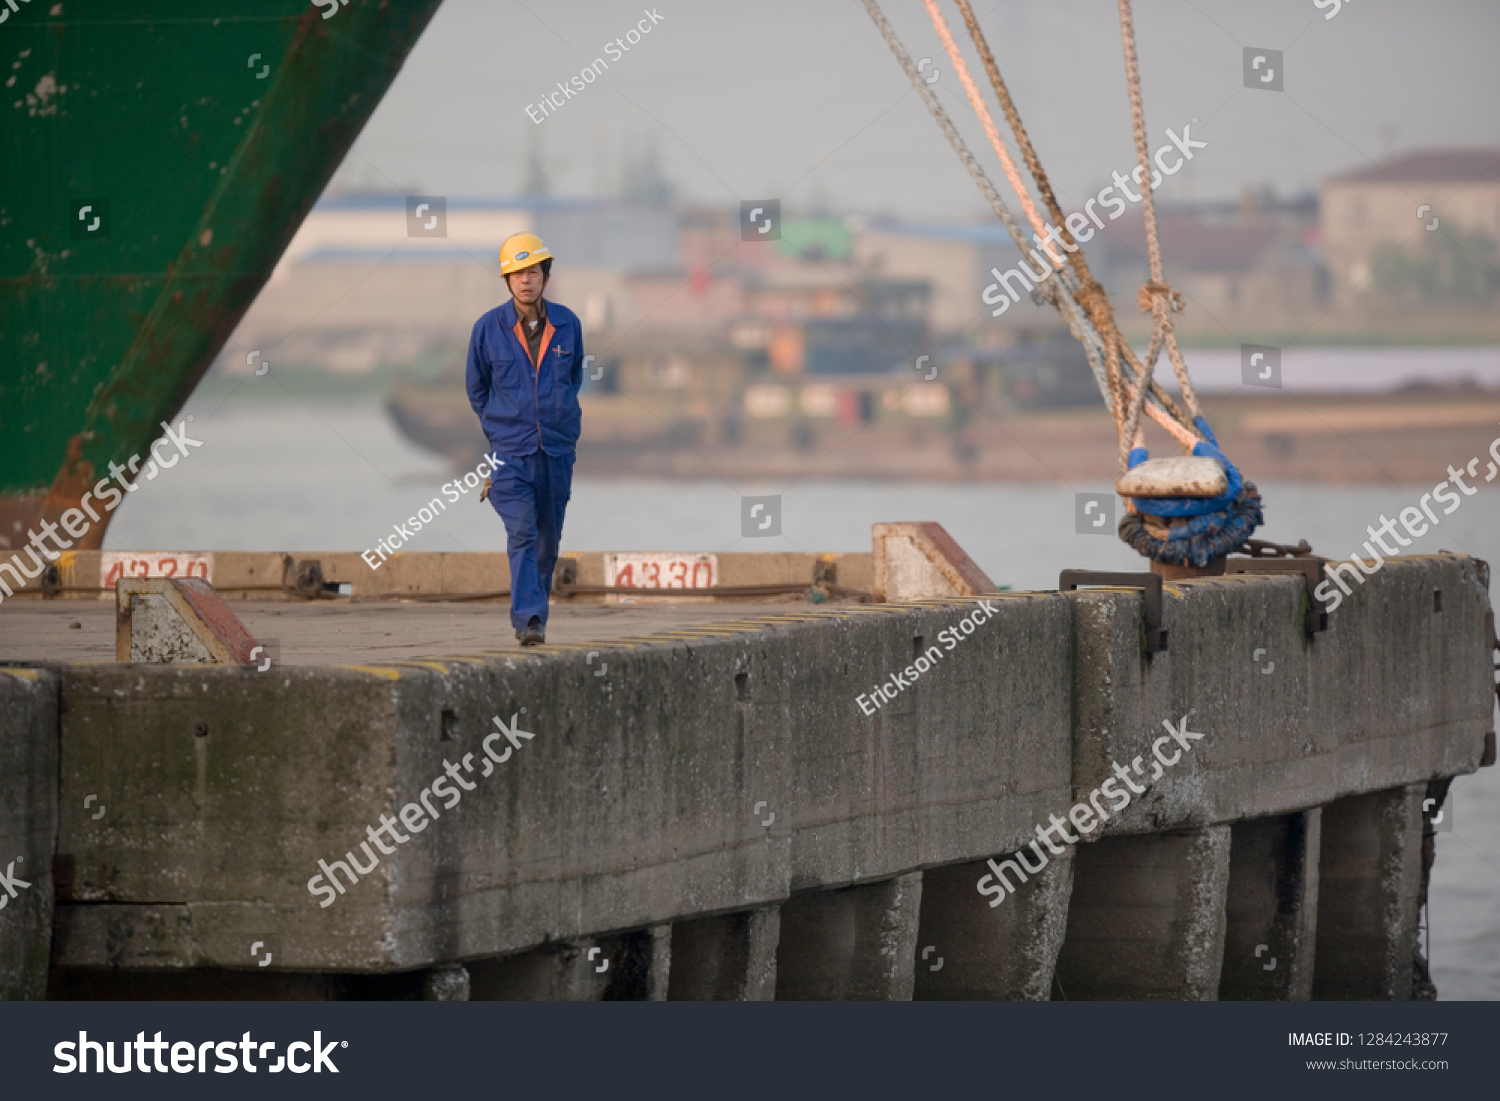 Portrait of a mid-adult man walking on a wharf. #1284243877